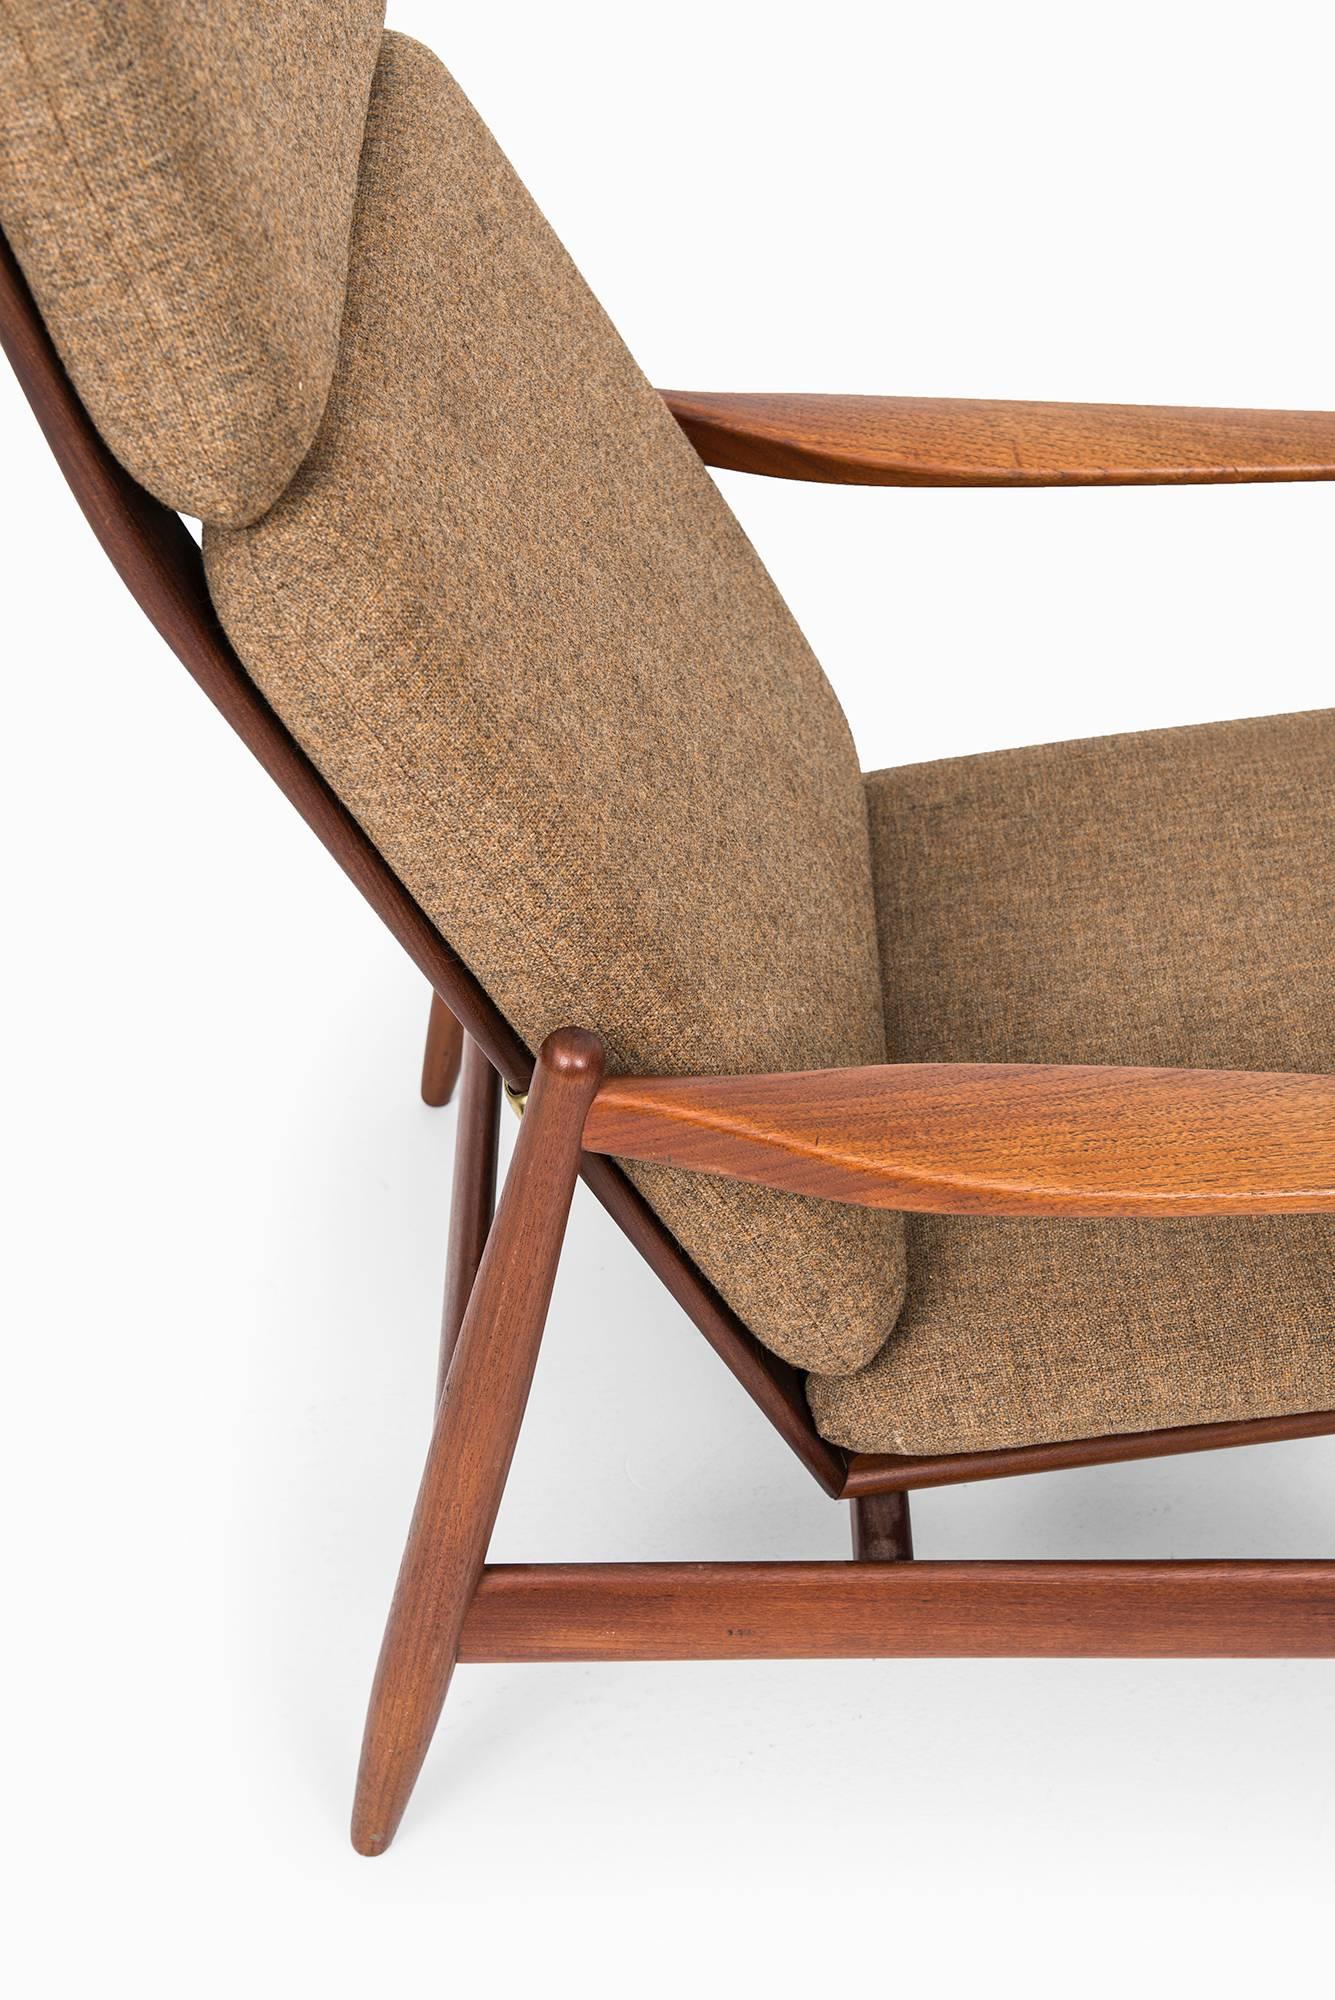 Mid-20th Century Poul Volther Easy Chair Model 340 by Frem Røjle in Denmark